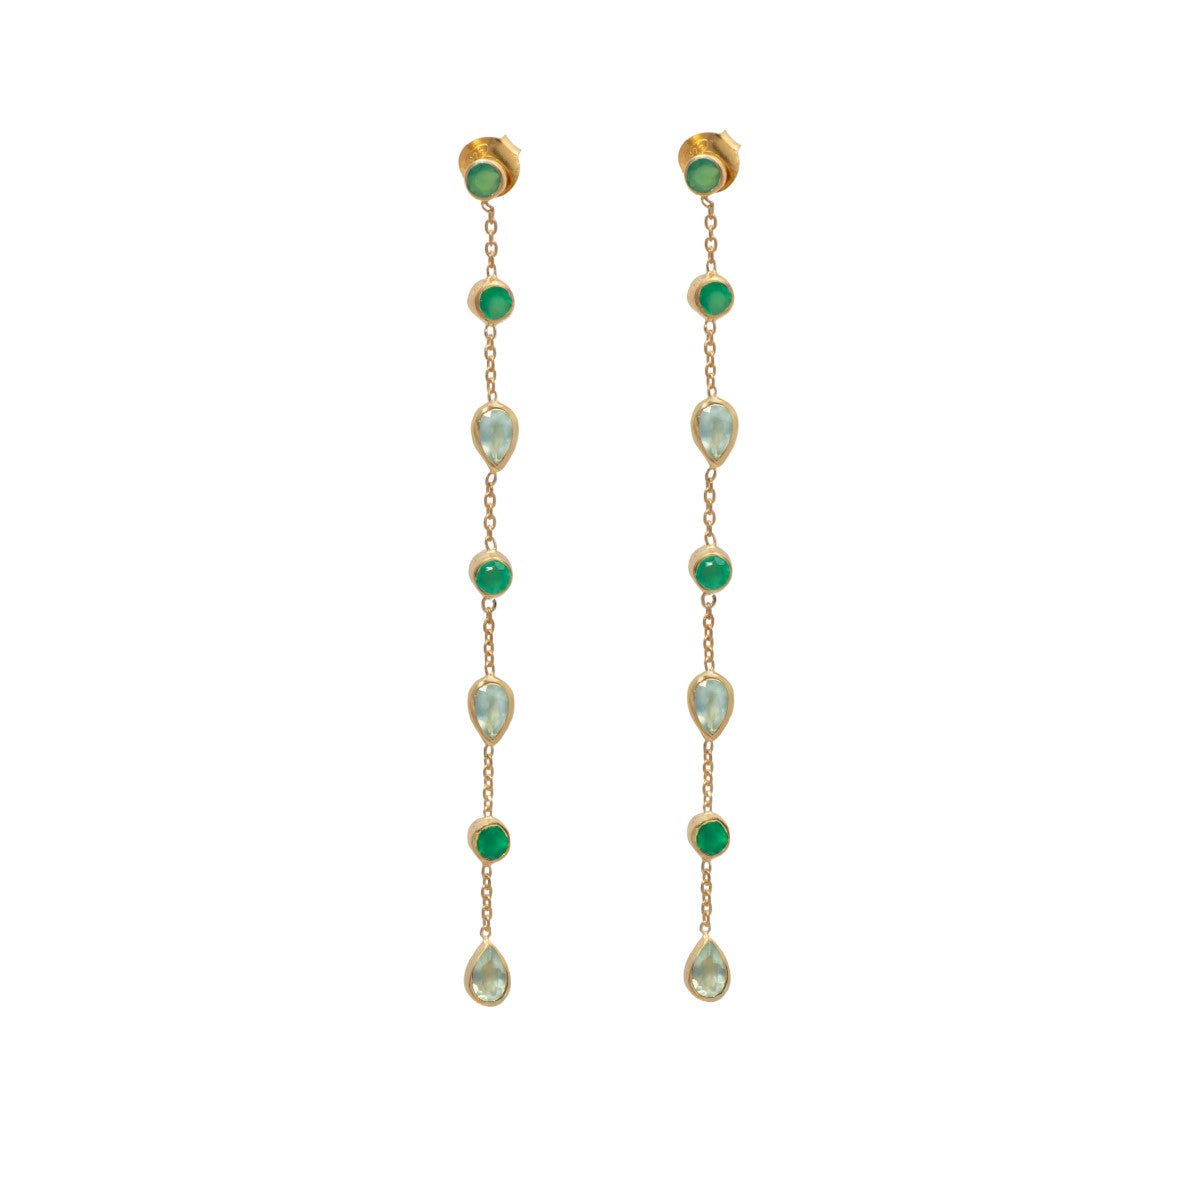 Long fine earrings with small round and teardrop gemstones - Green Onyx and Aqua Chalcedony